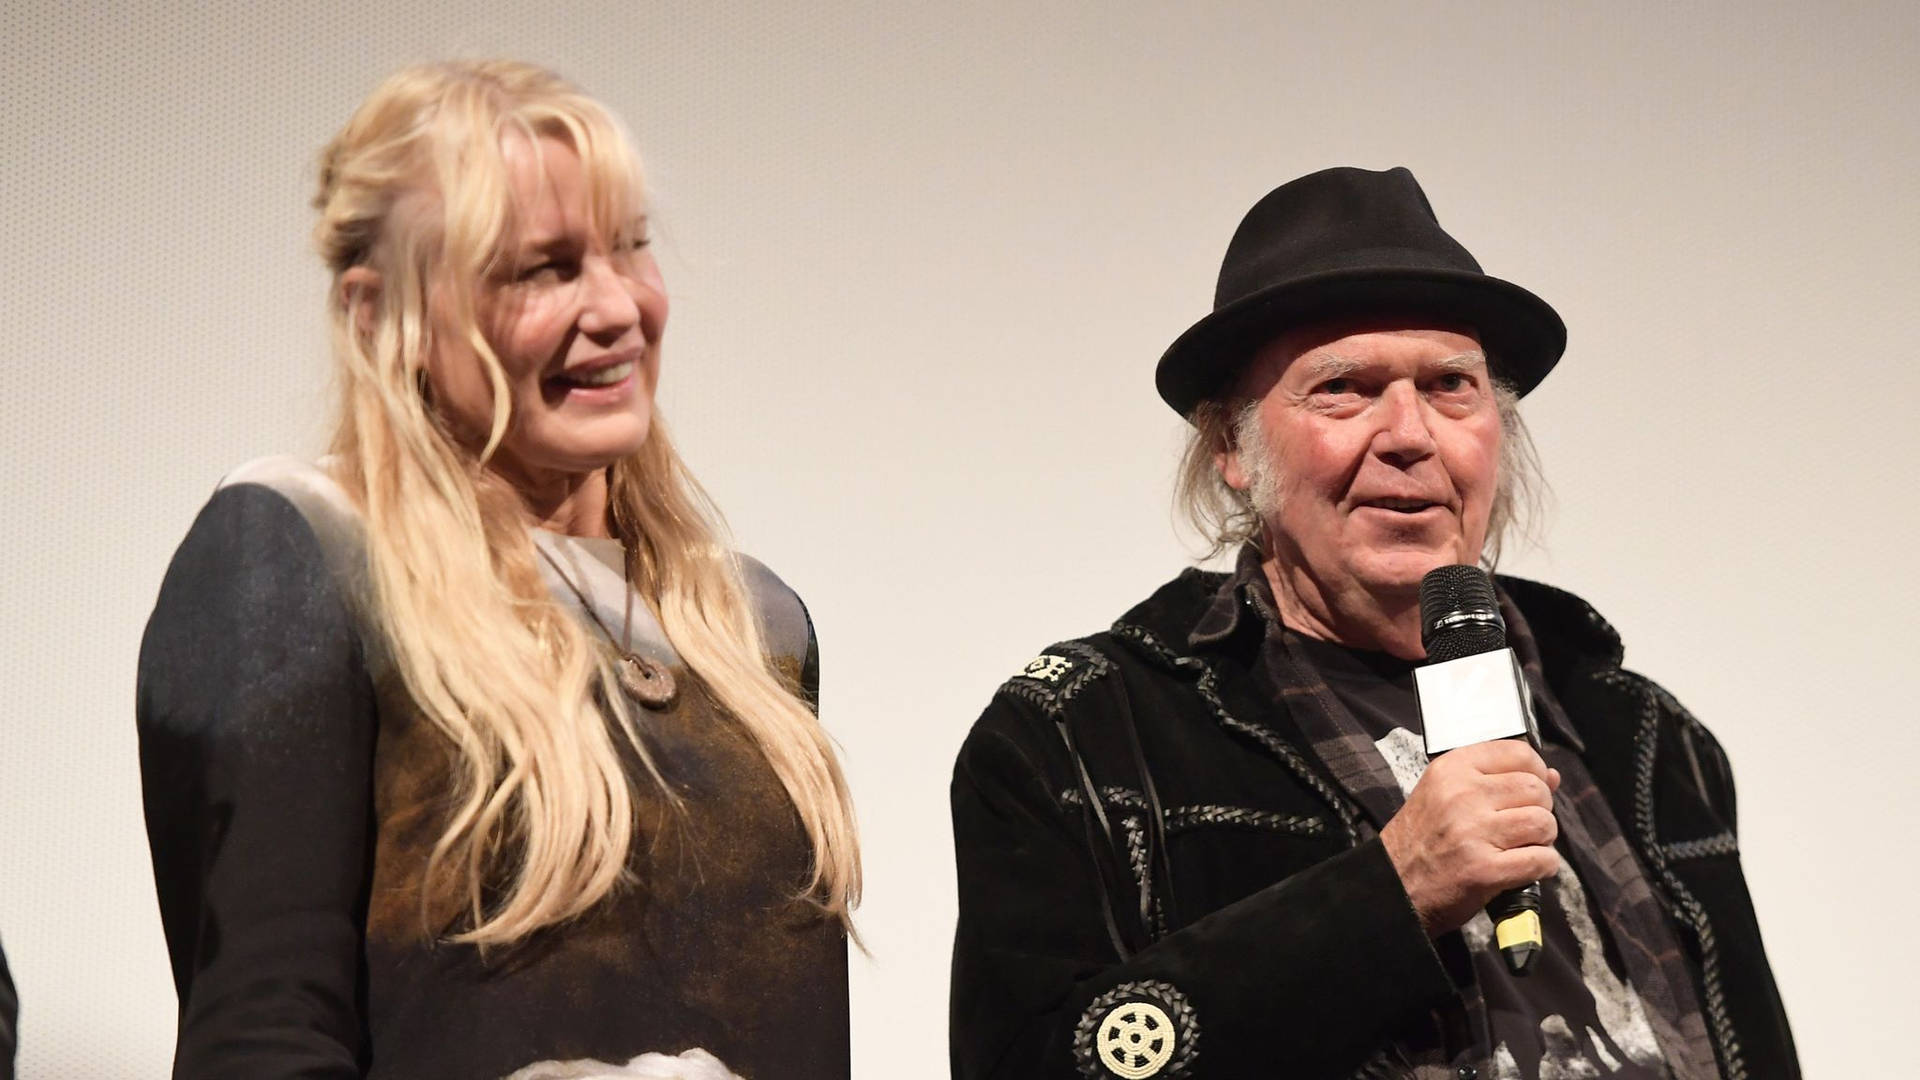 Darylhannah Und Neil Young Wallpaper